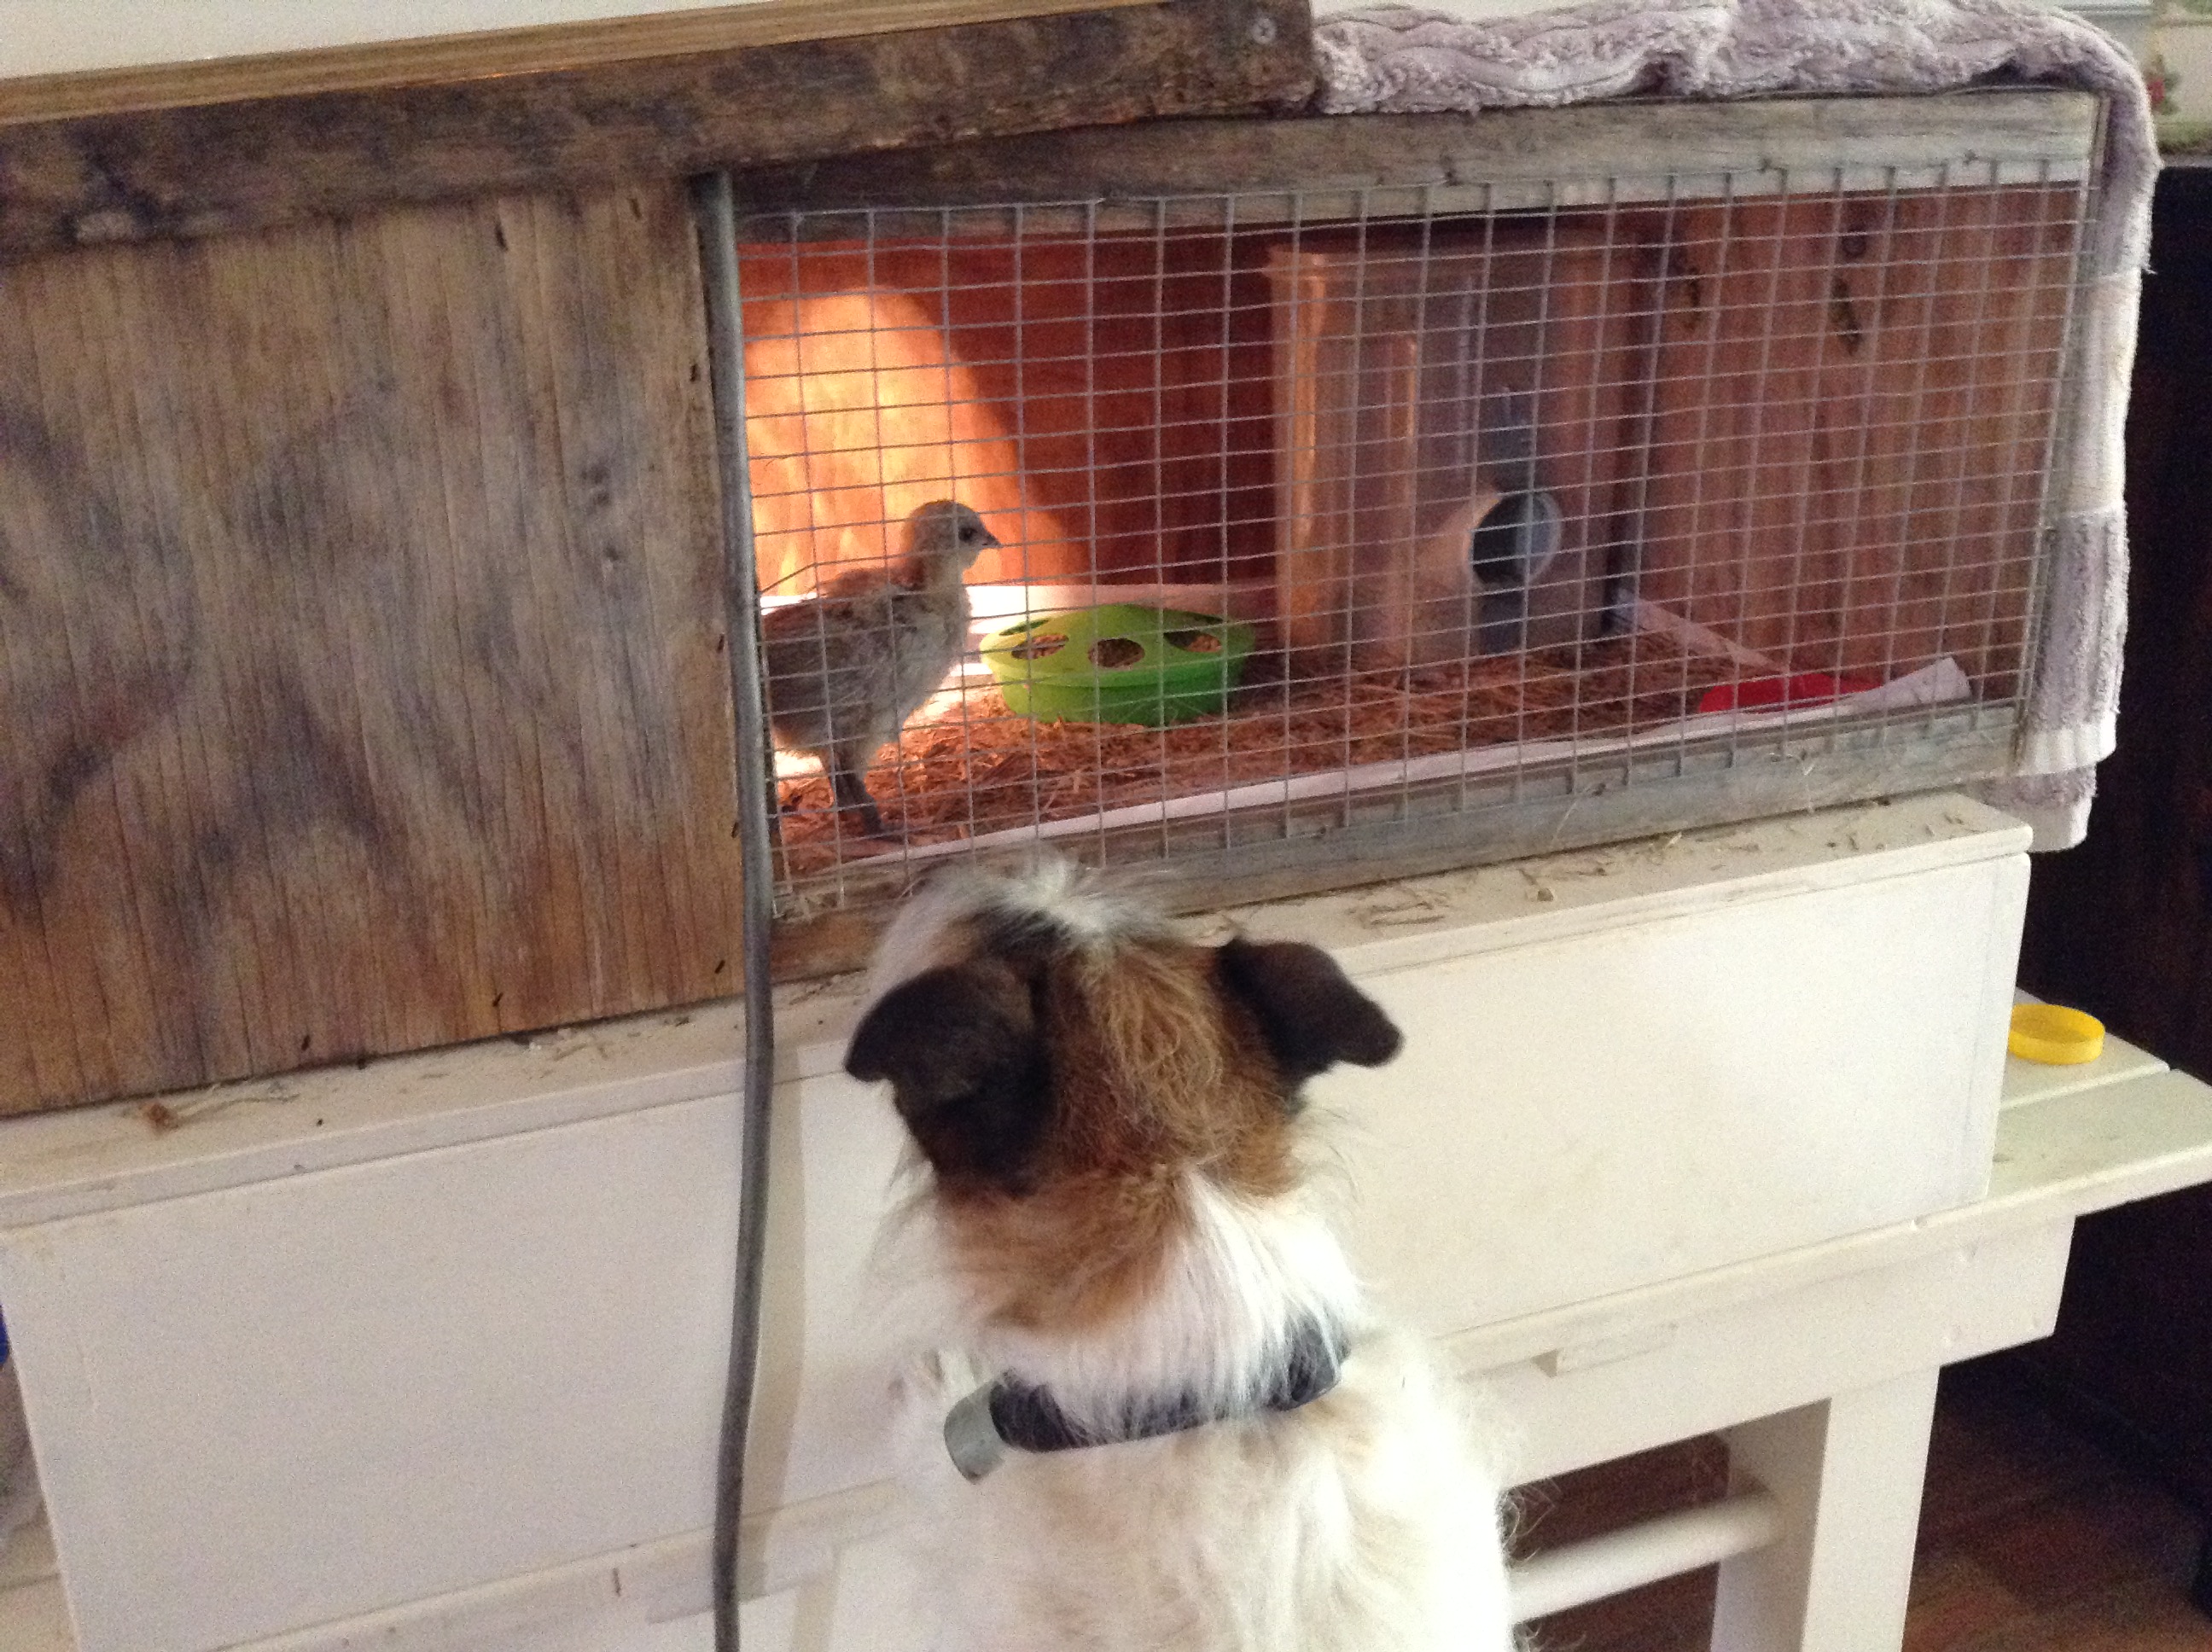 Dog meets Chick